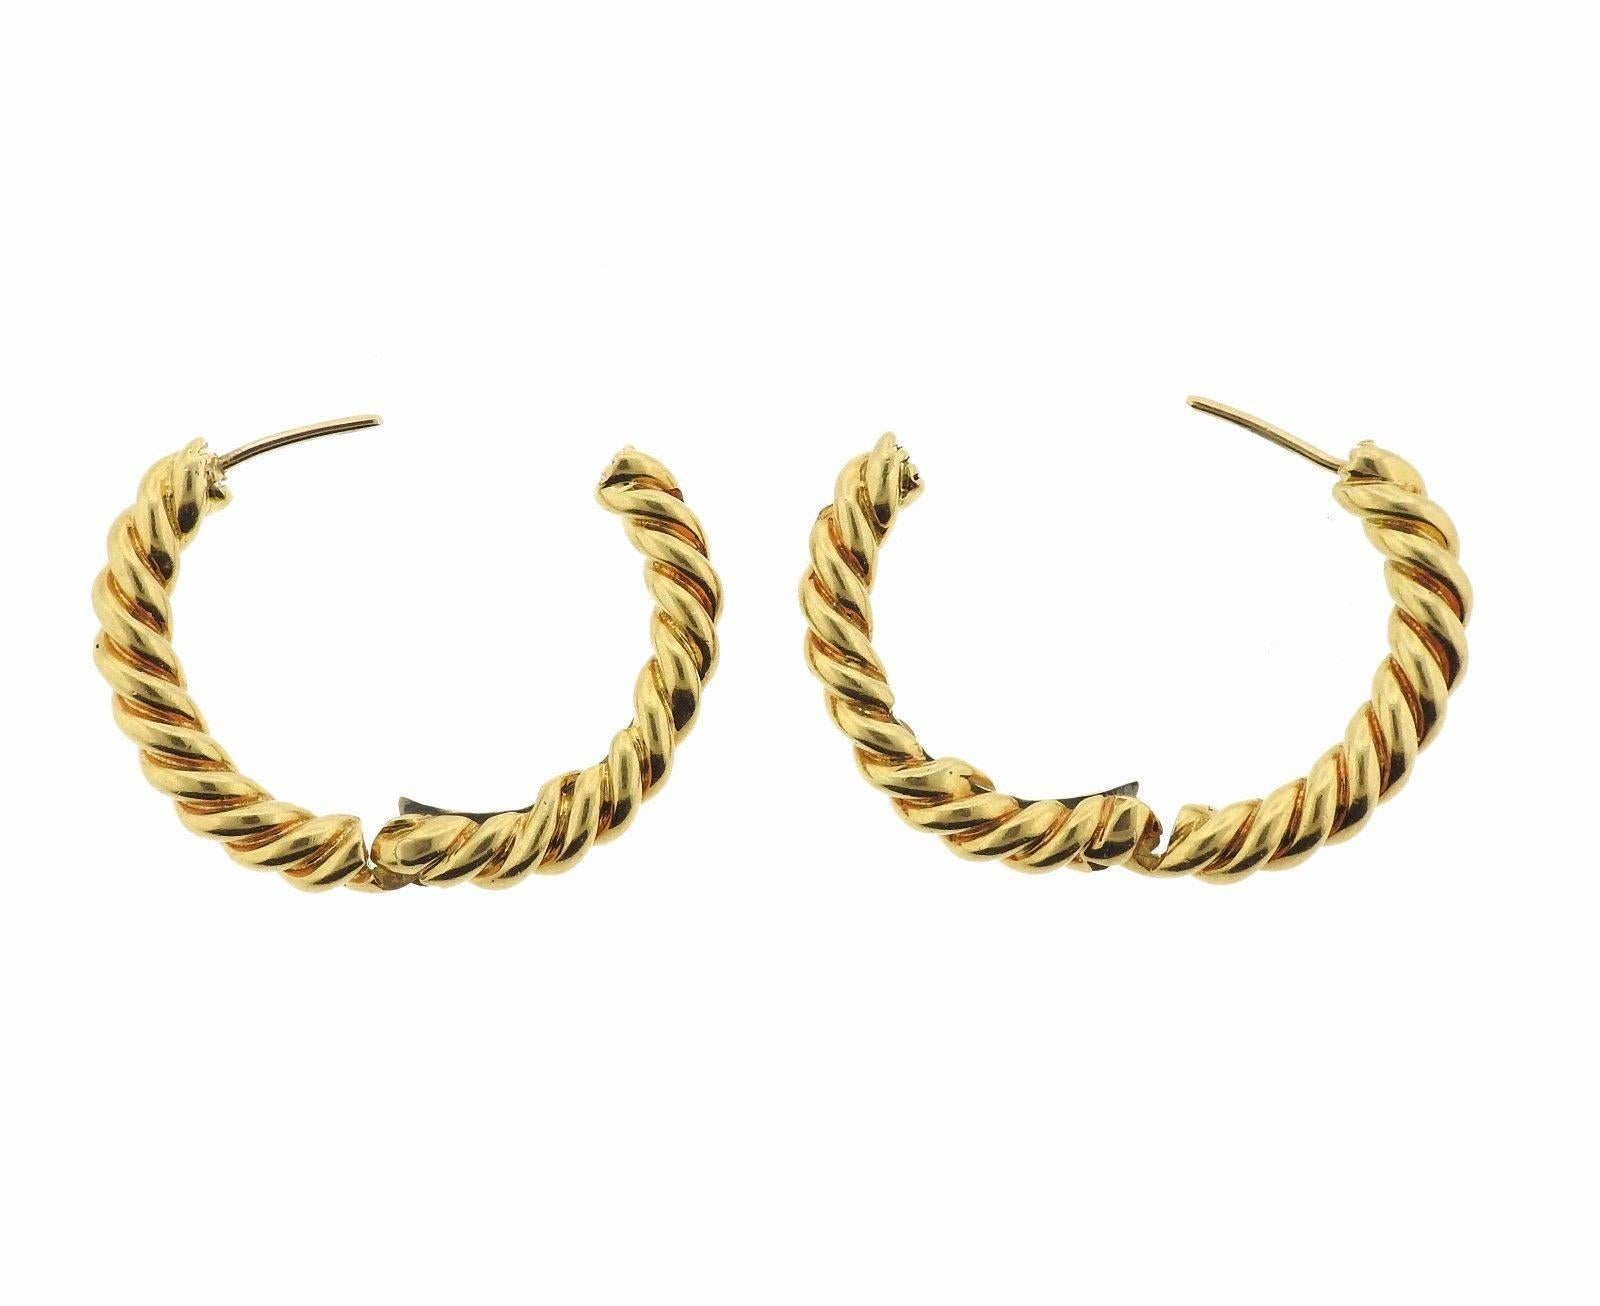 A pair of 18K gold hoop earrings.  The earrings measure 26mm long

MEASUREMENTS	Earrings measure 26mm long x 3.9mm wide.  The weight of the pair is 18,2 grams.  Marked: Webb, 18k.